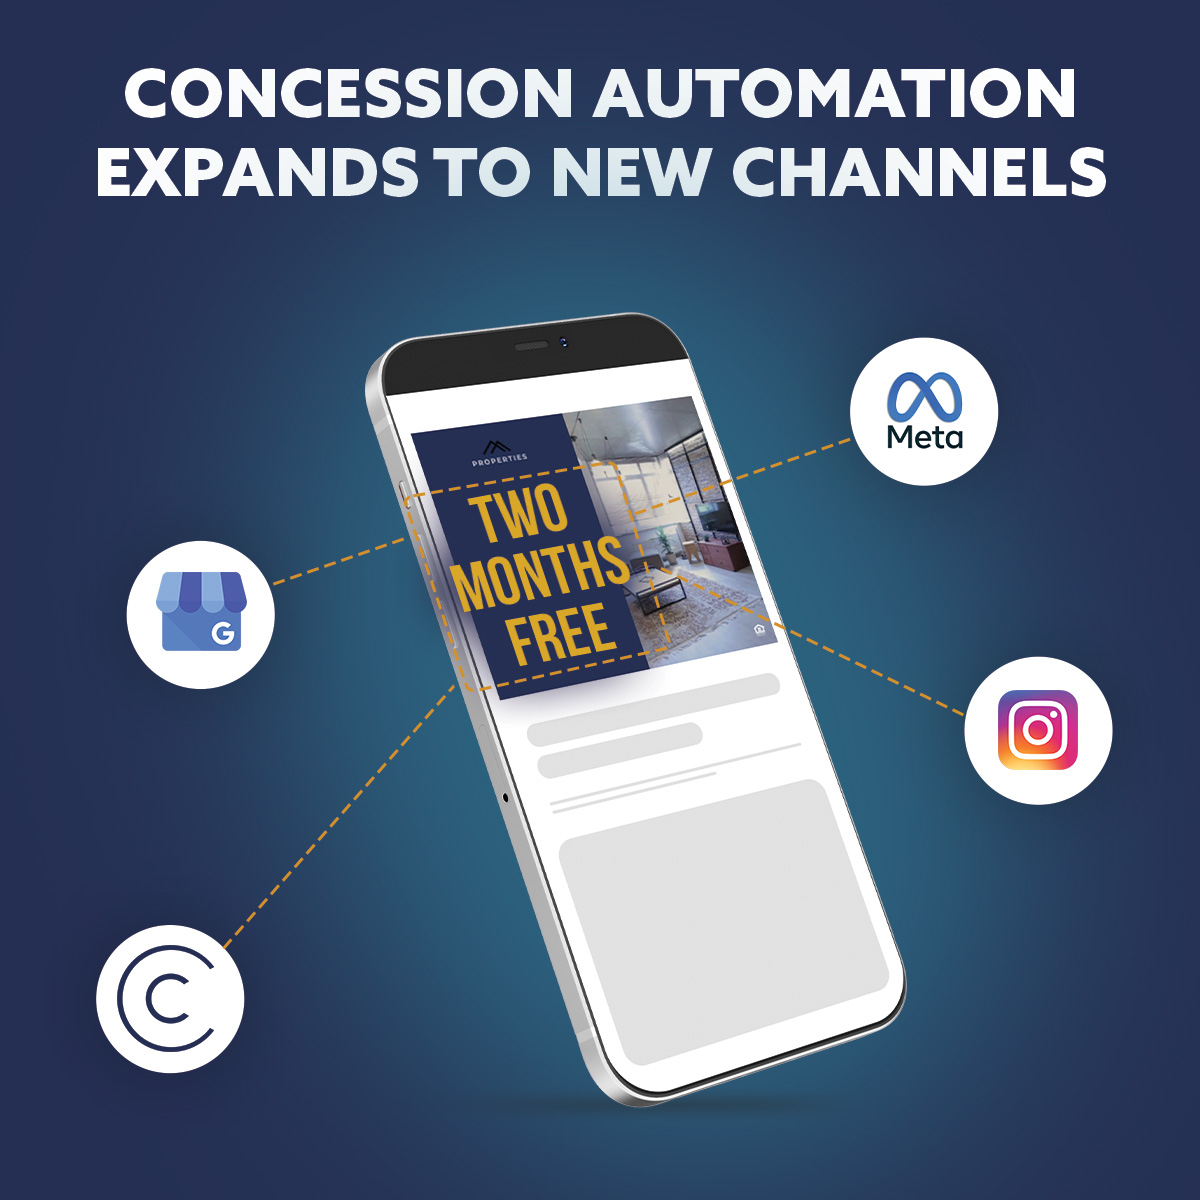 Concession Automation Expands to New Channels